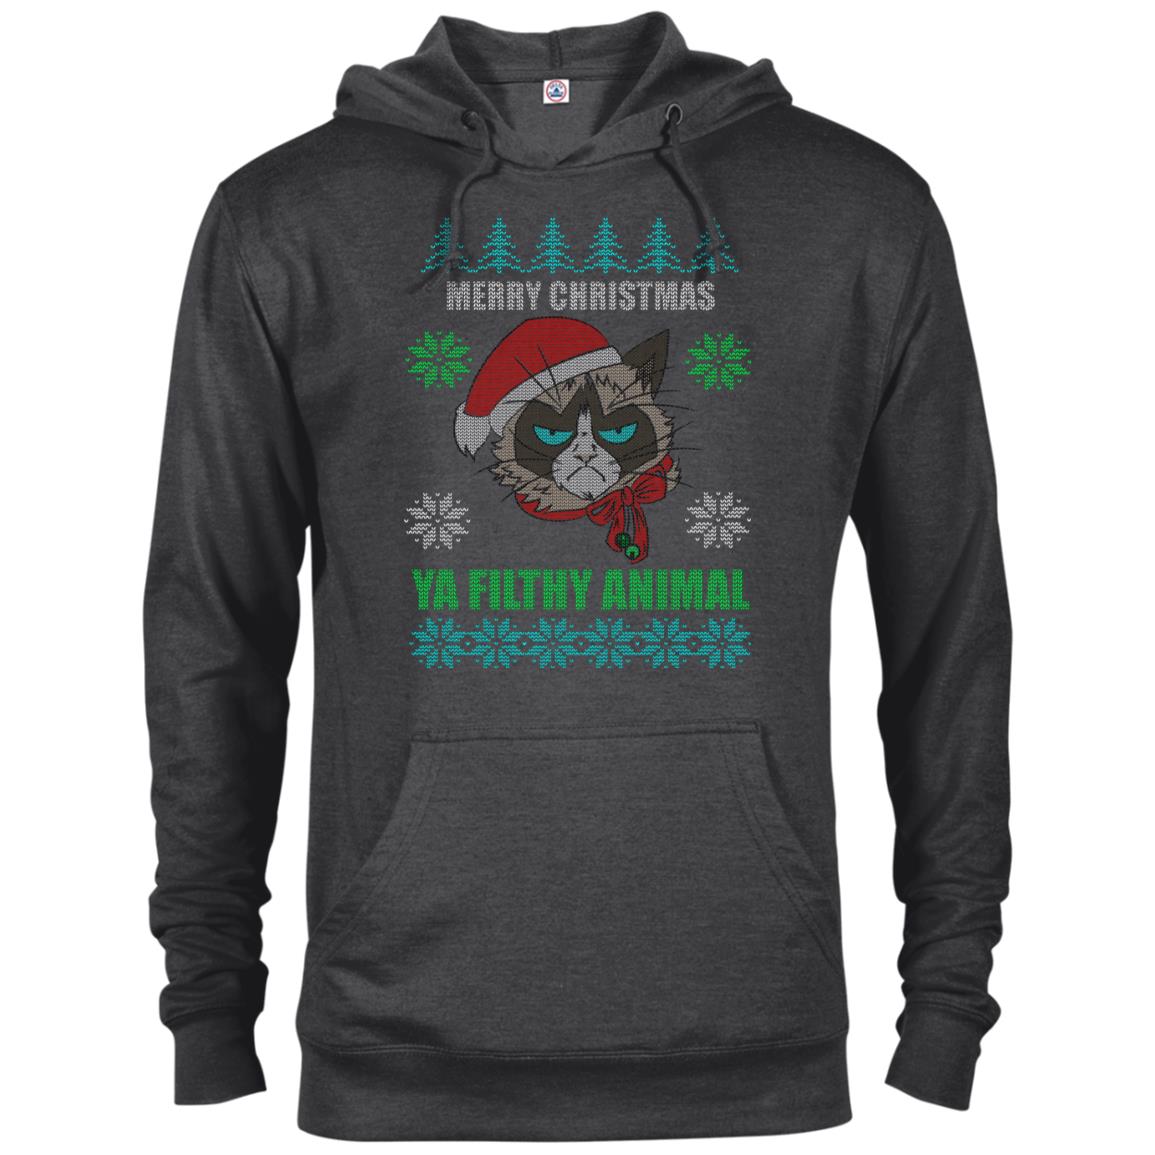 Christmas Ugly Sweater Grumpy Cat Funny Hoodies sweaters - GoneBold.gift